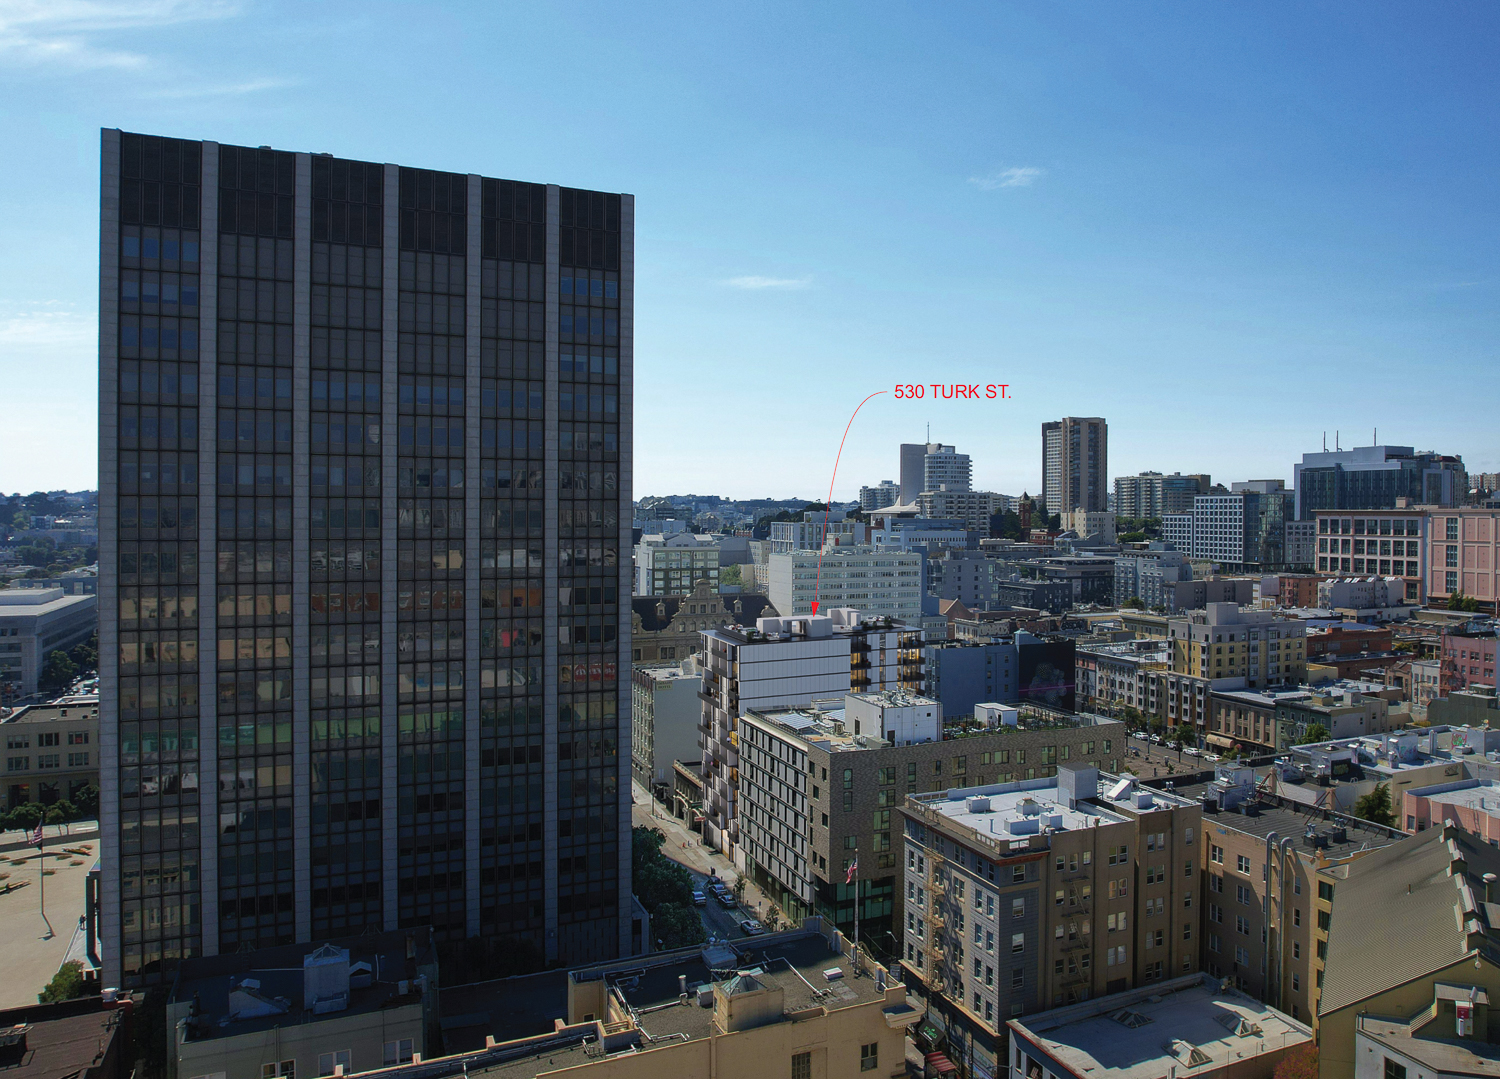 530 Turk Street aerial perspective with the Federal Building in context, rendering by RG Architecture